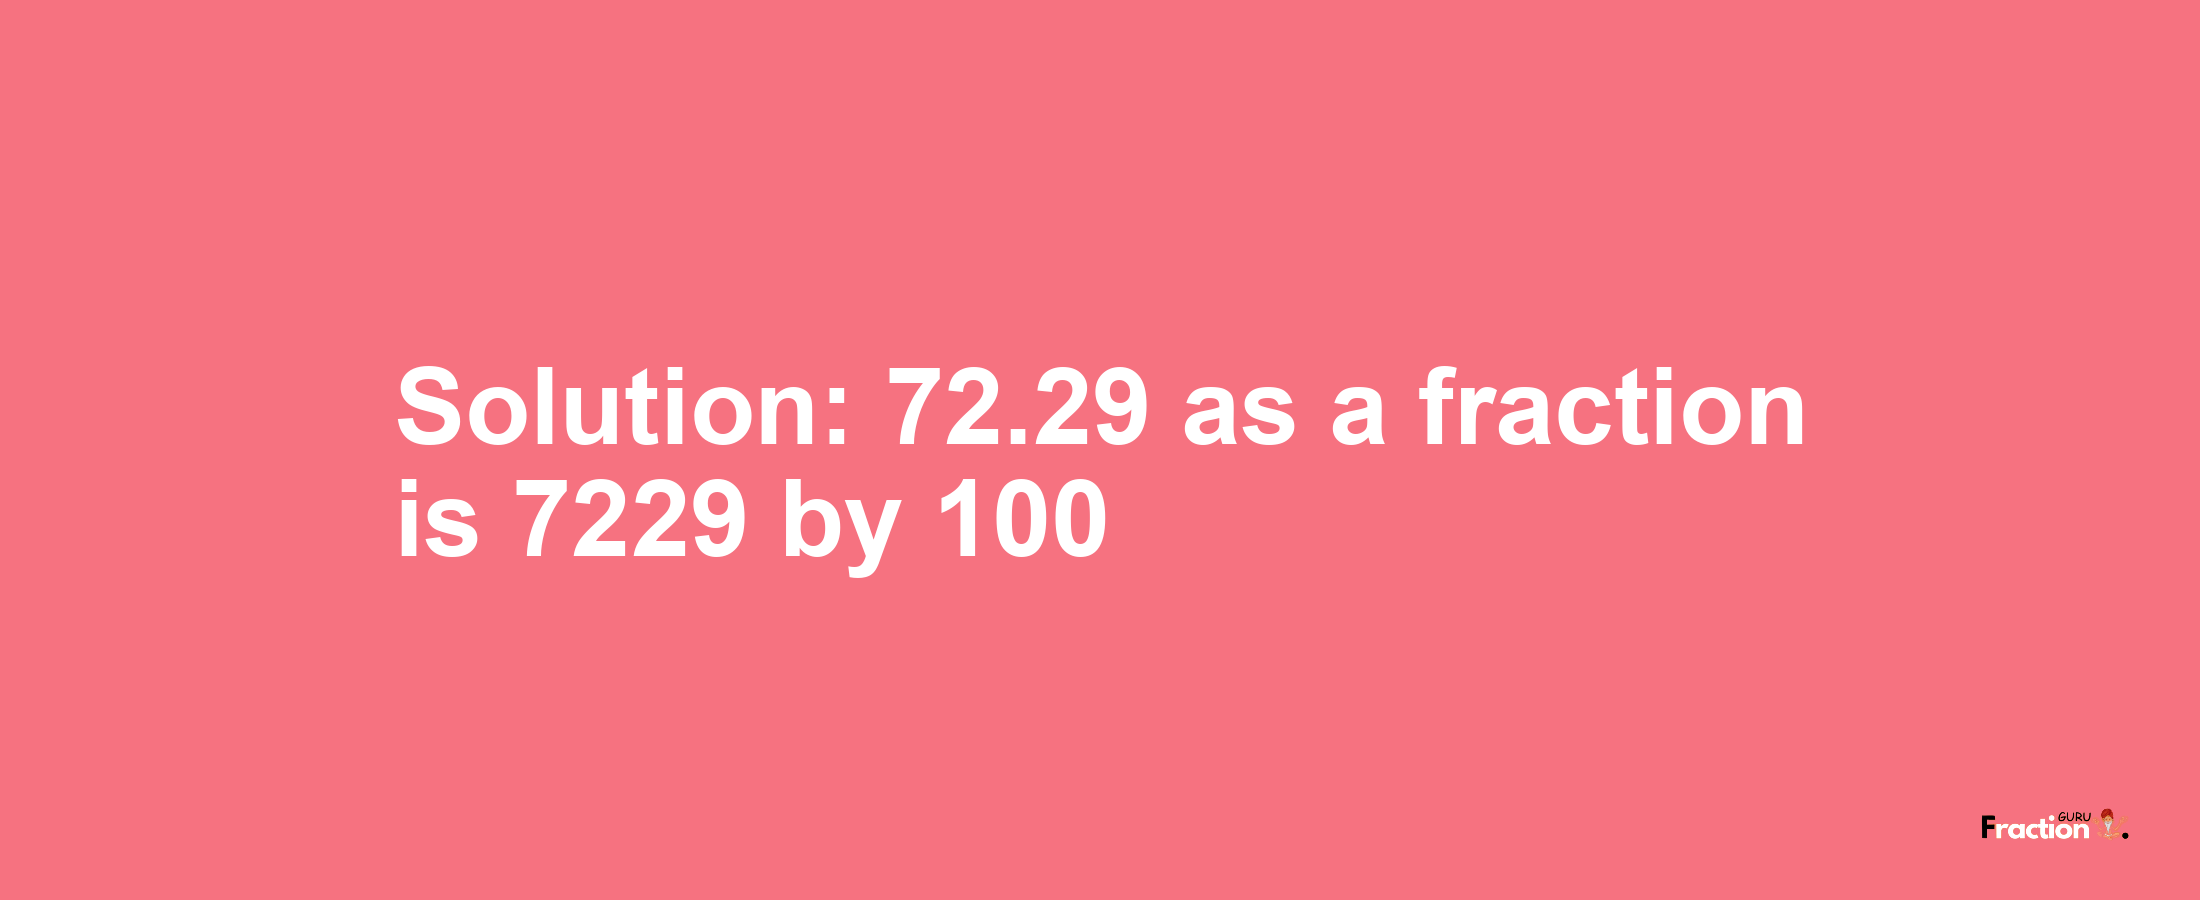 Solution:72.29 as a fraction is 7229/100